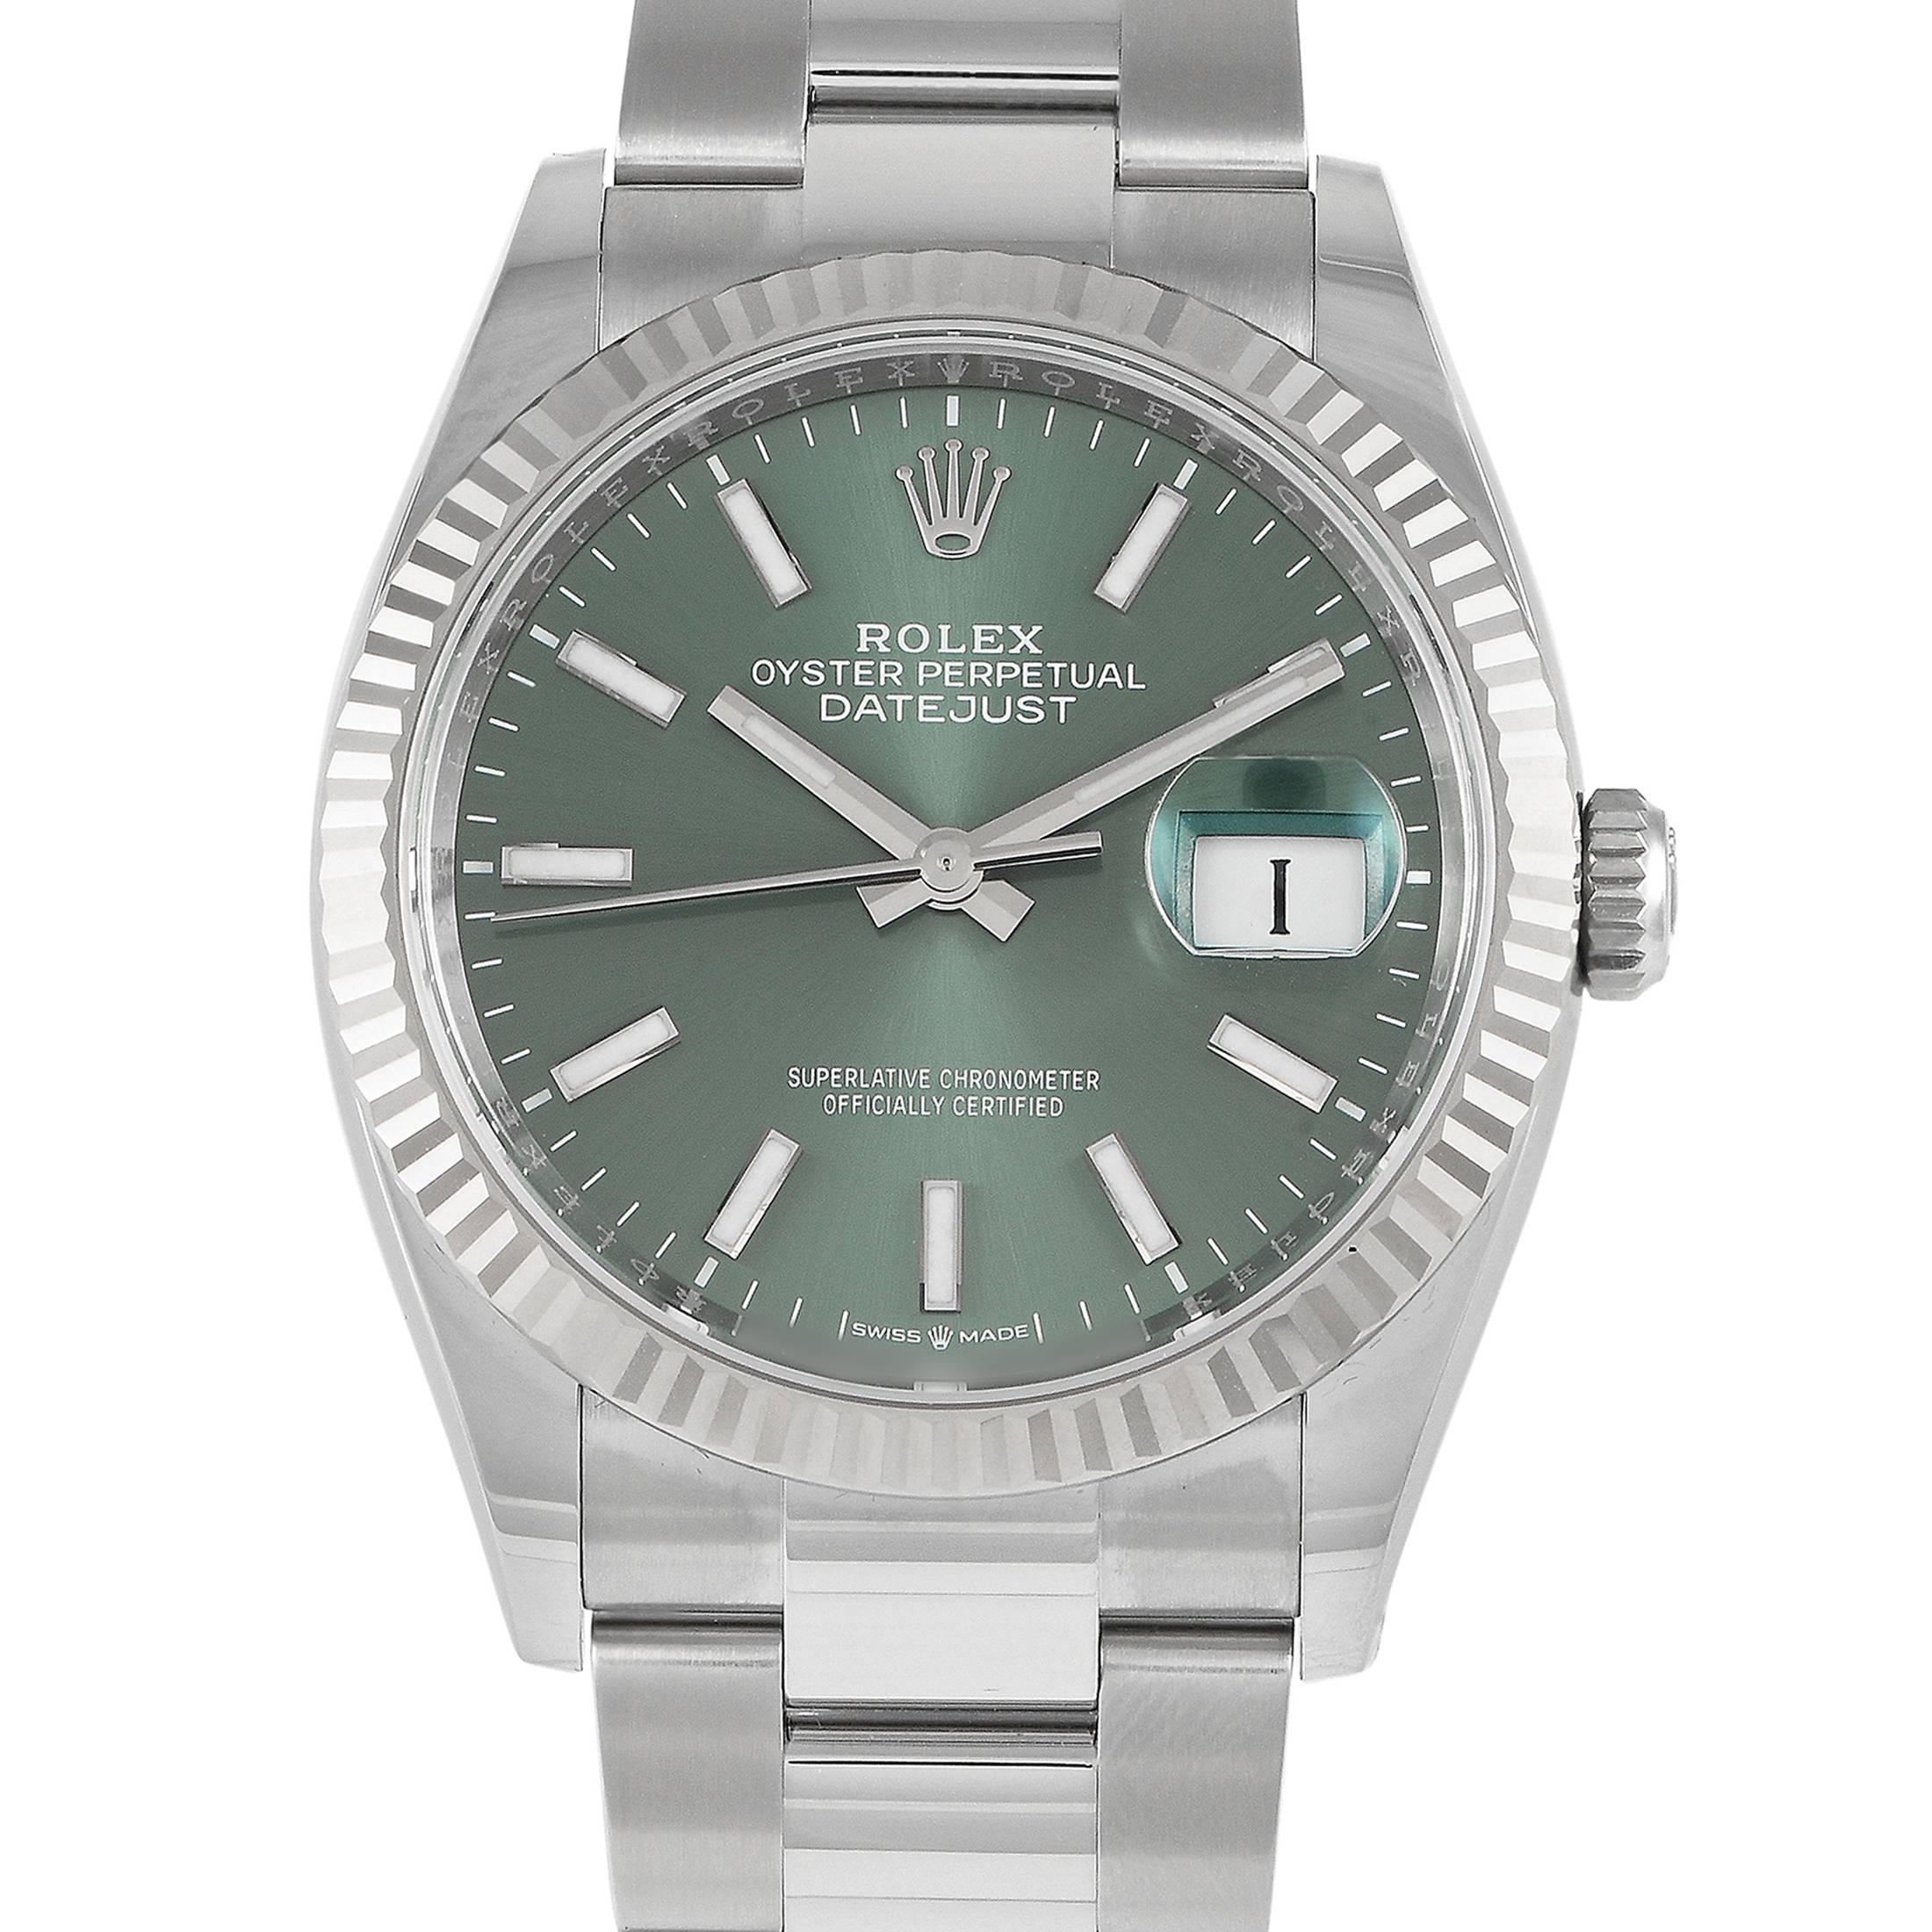 Rolex Submariner Price In Bd, green Dial